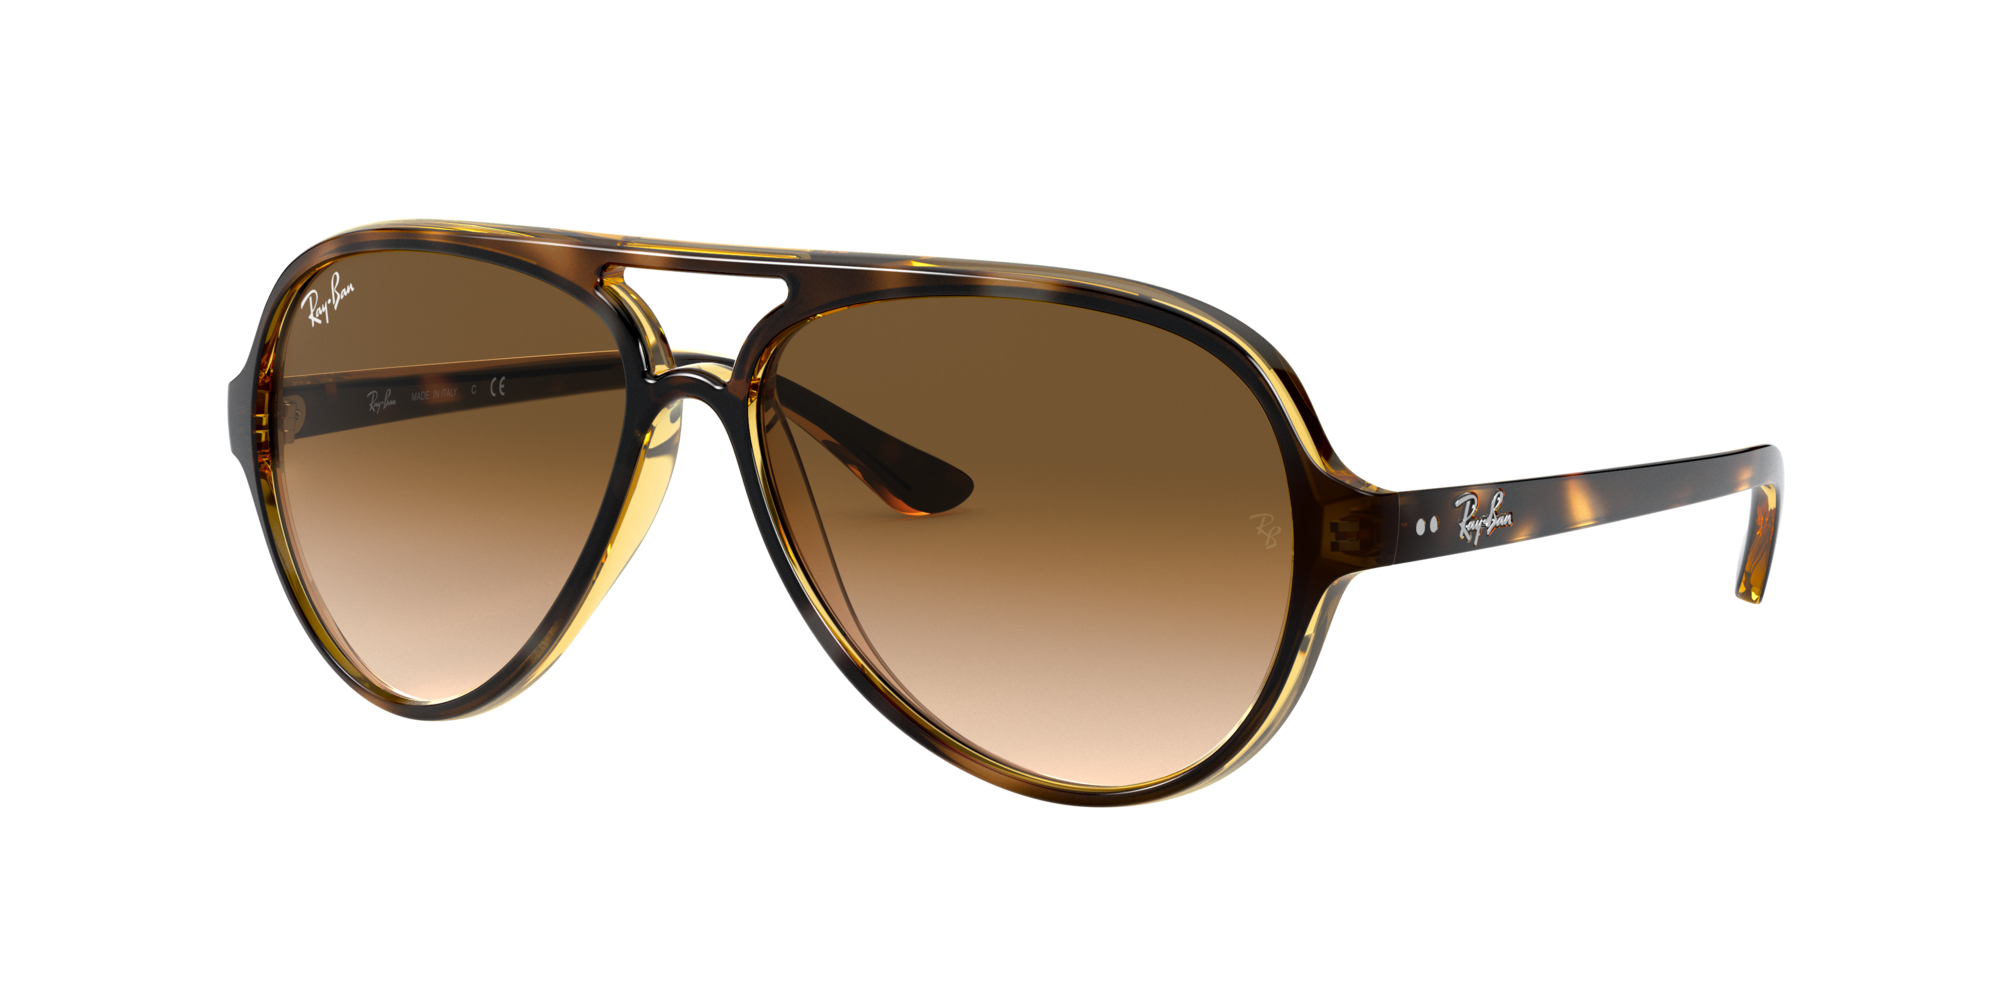 Ray-Ban RB4125 CATS 5000 CLASSIC 59 